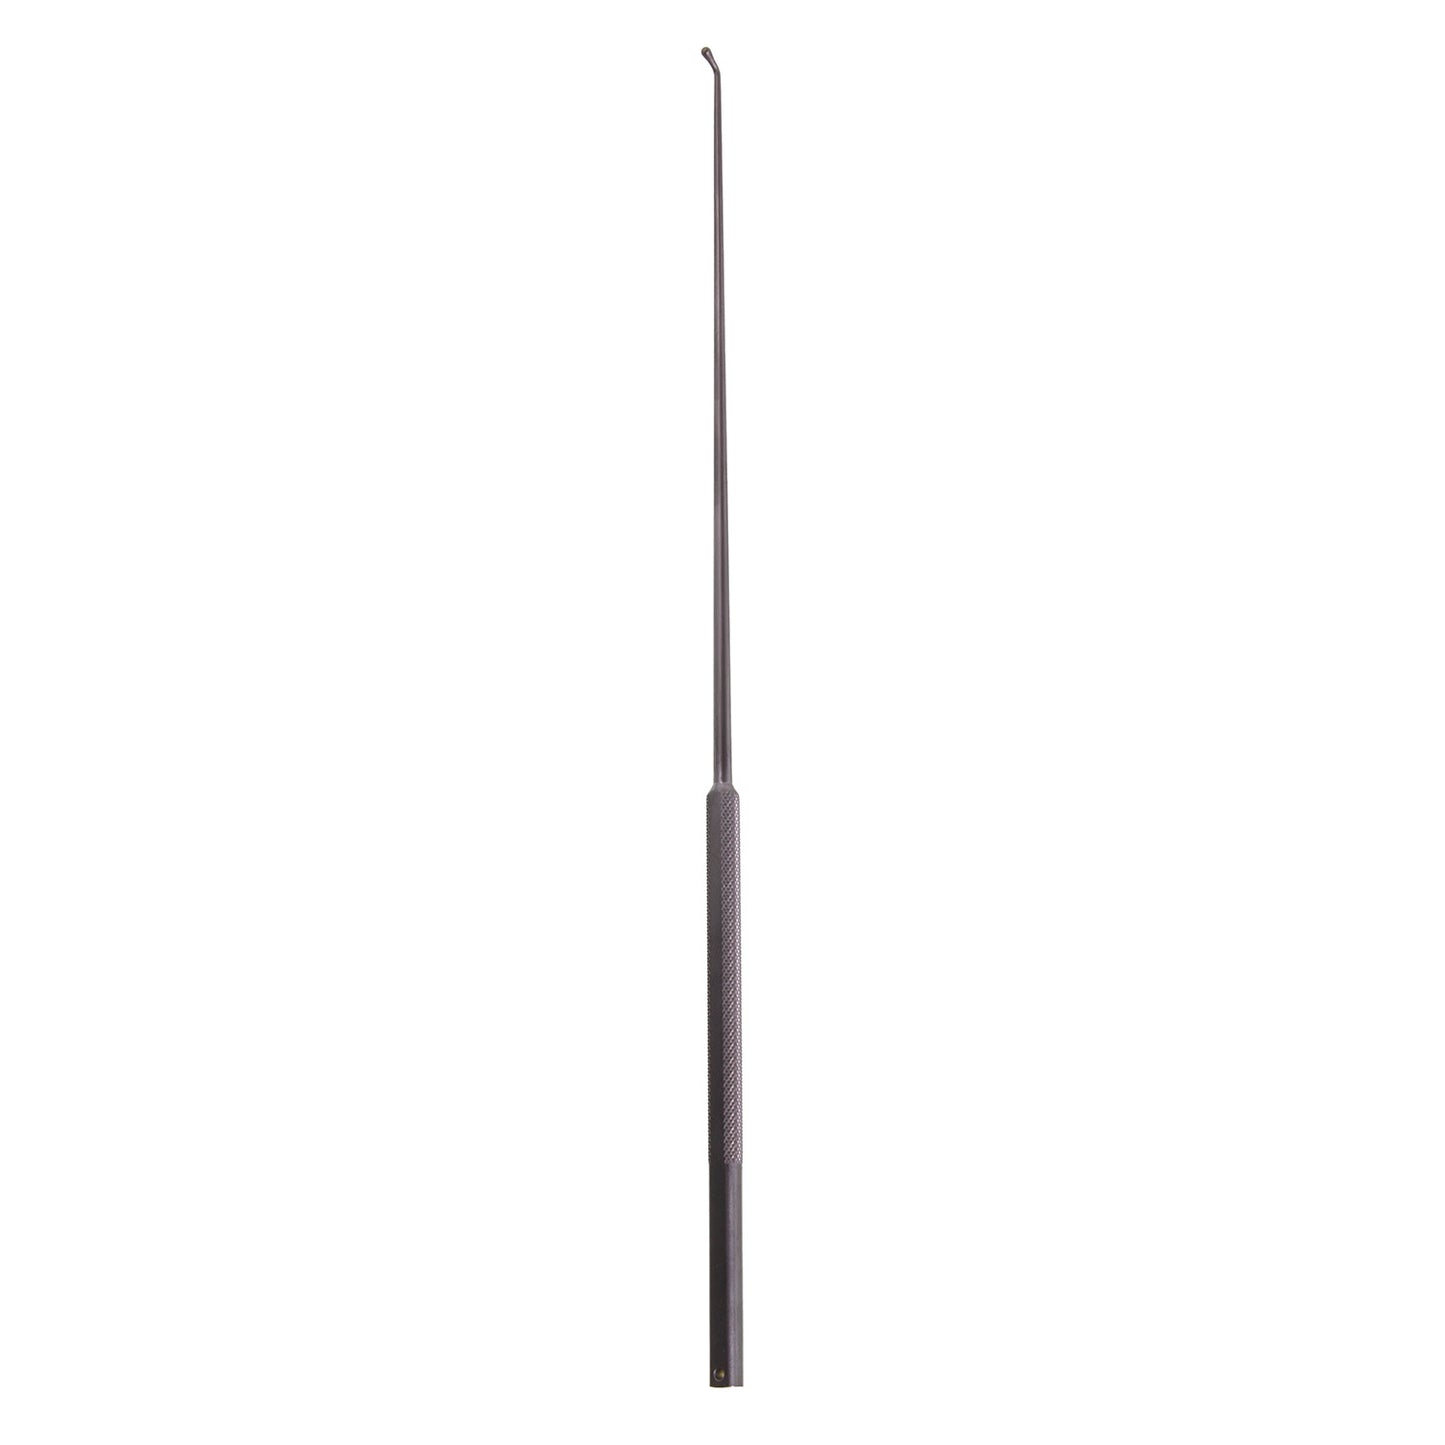 Spinal Probe 5mm tip angled 45°